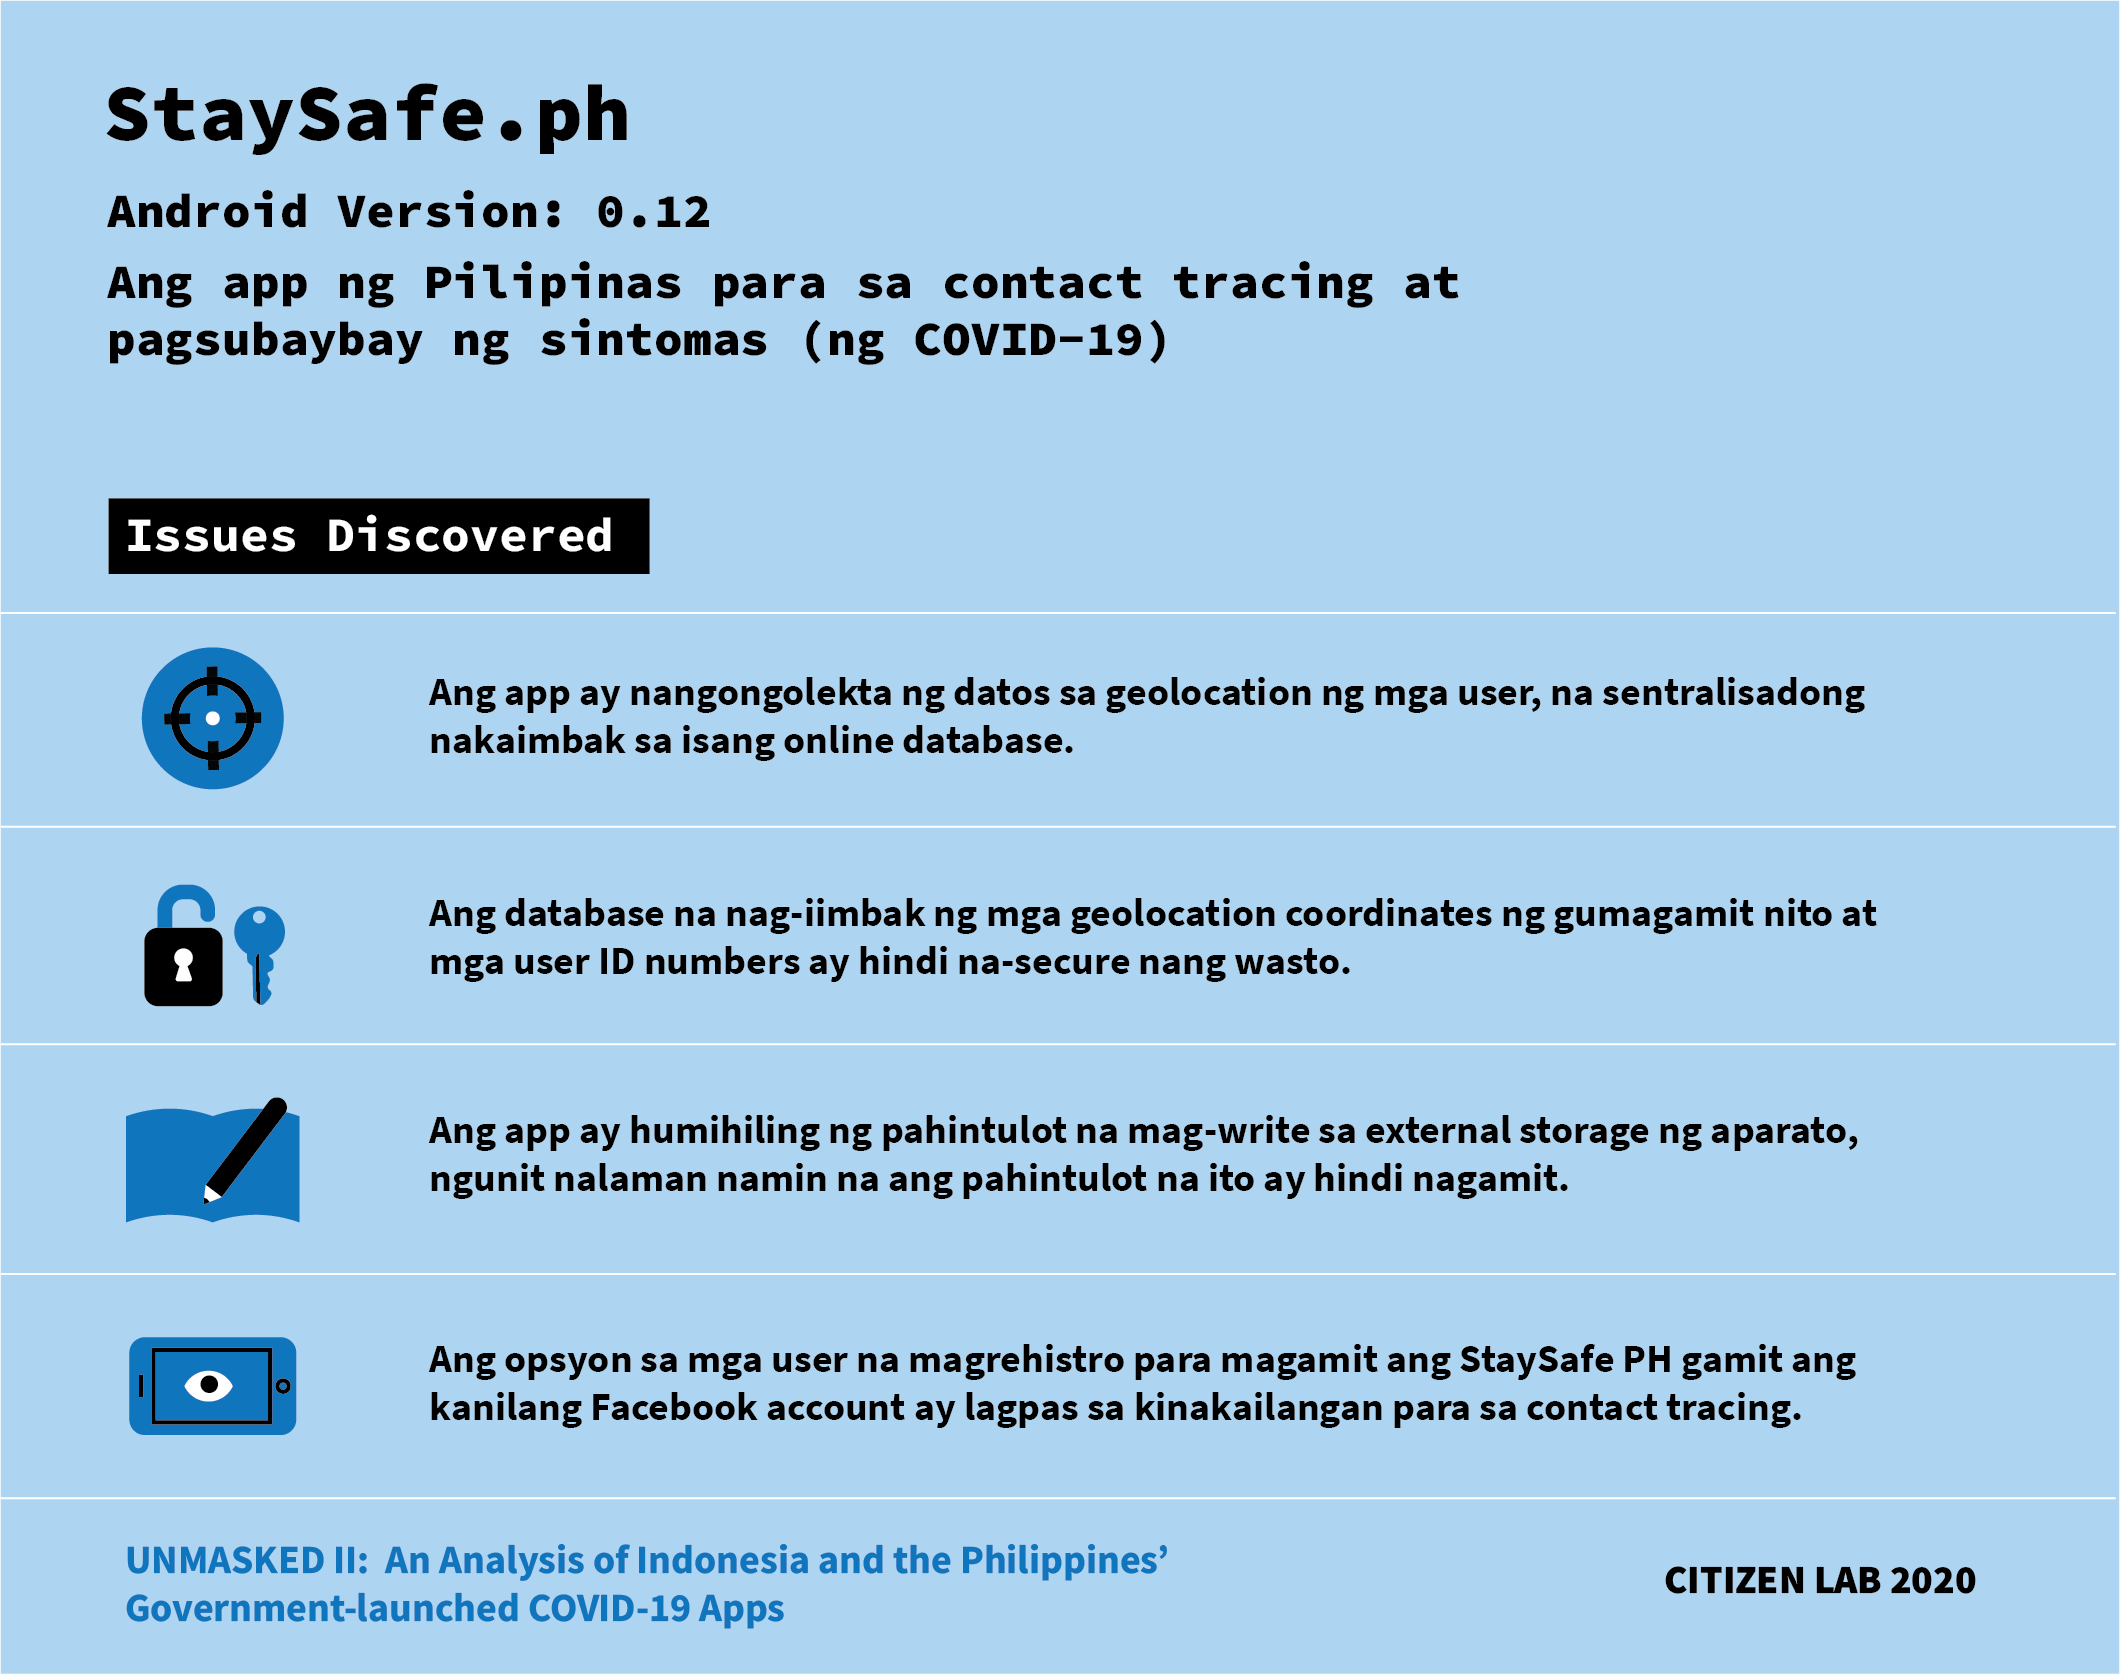 Issues discovered on the app StaySafe PH